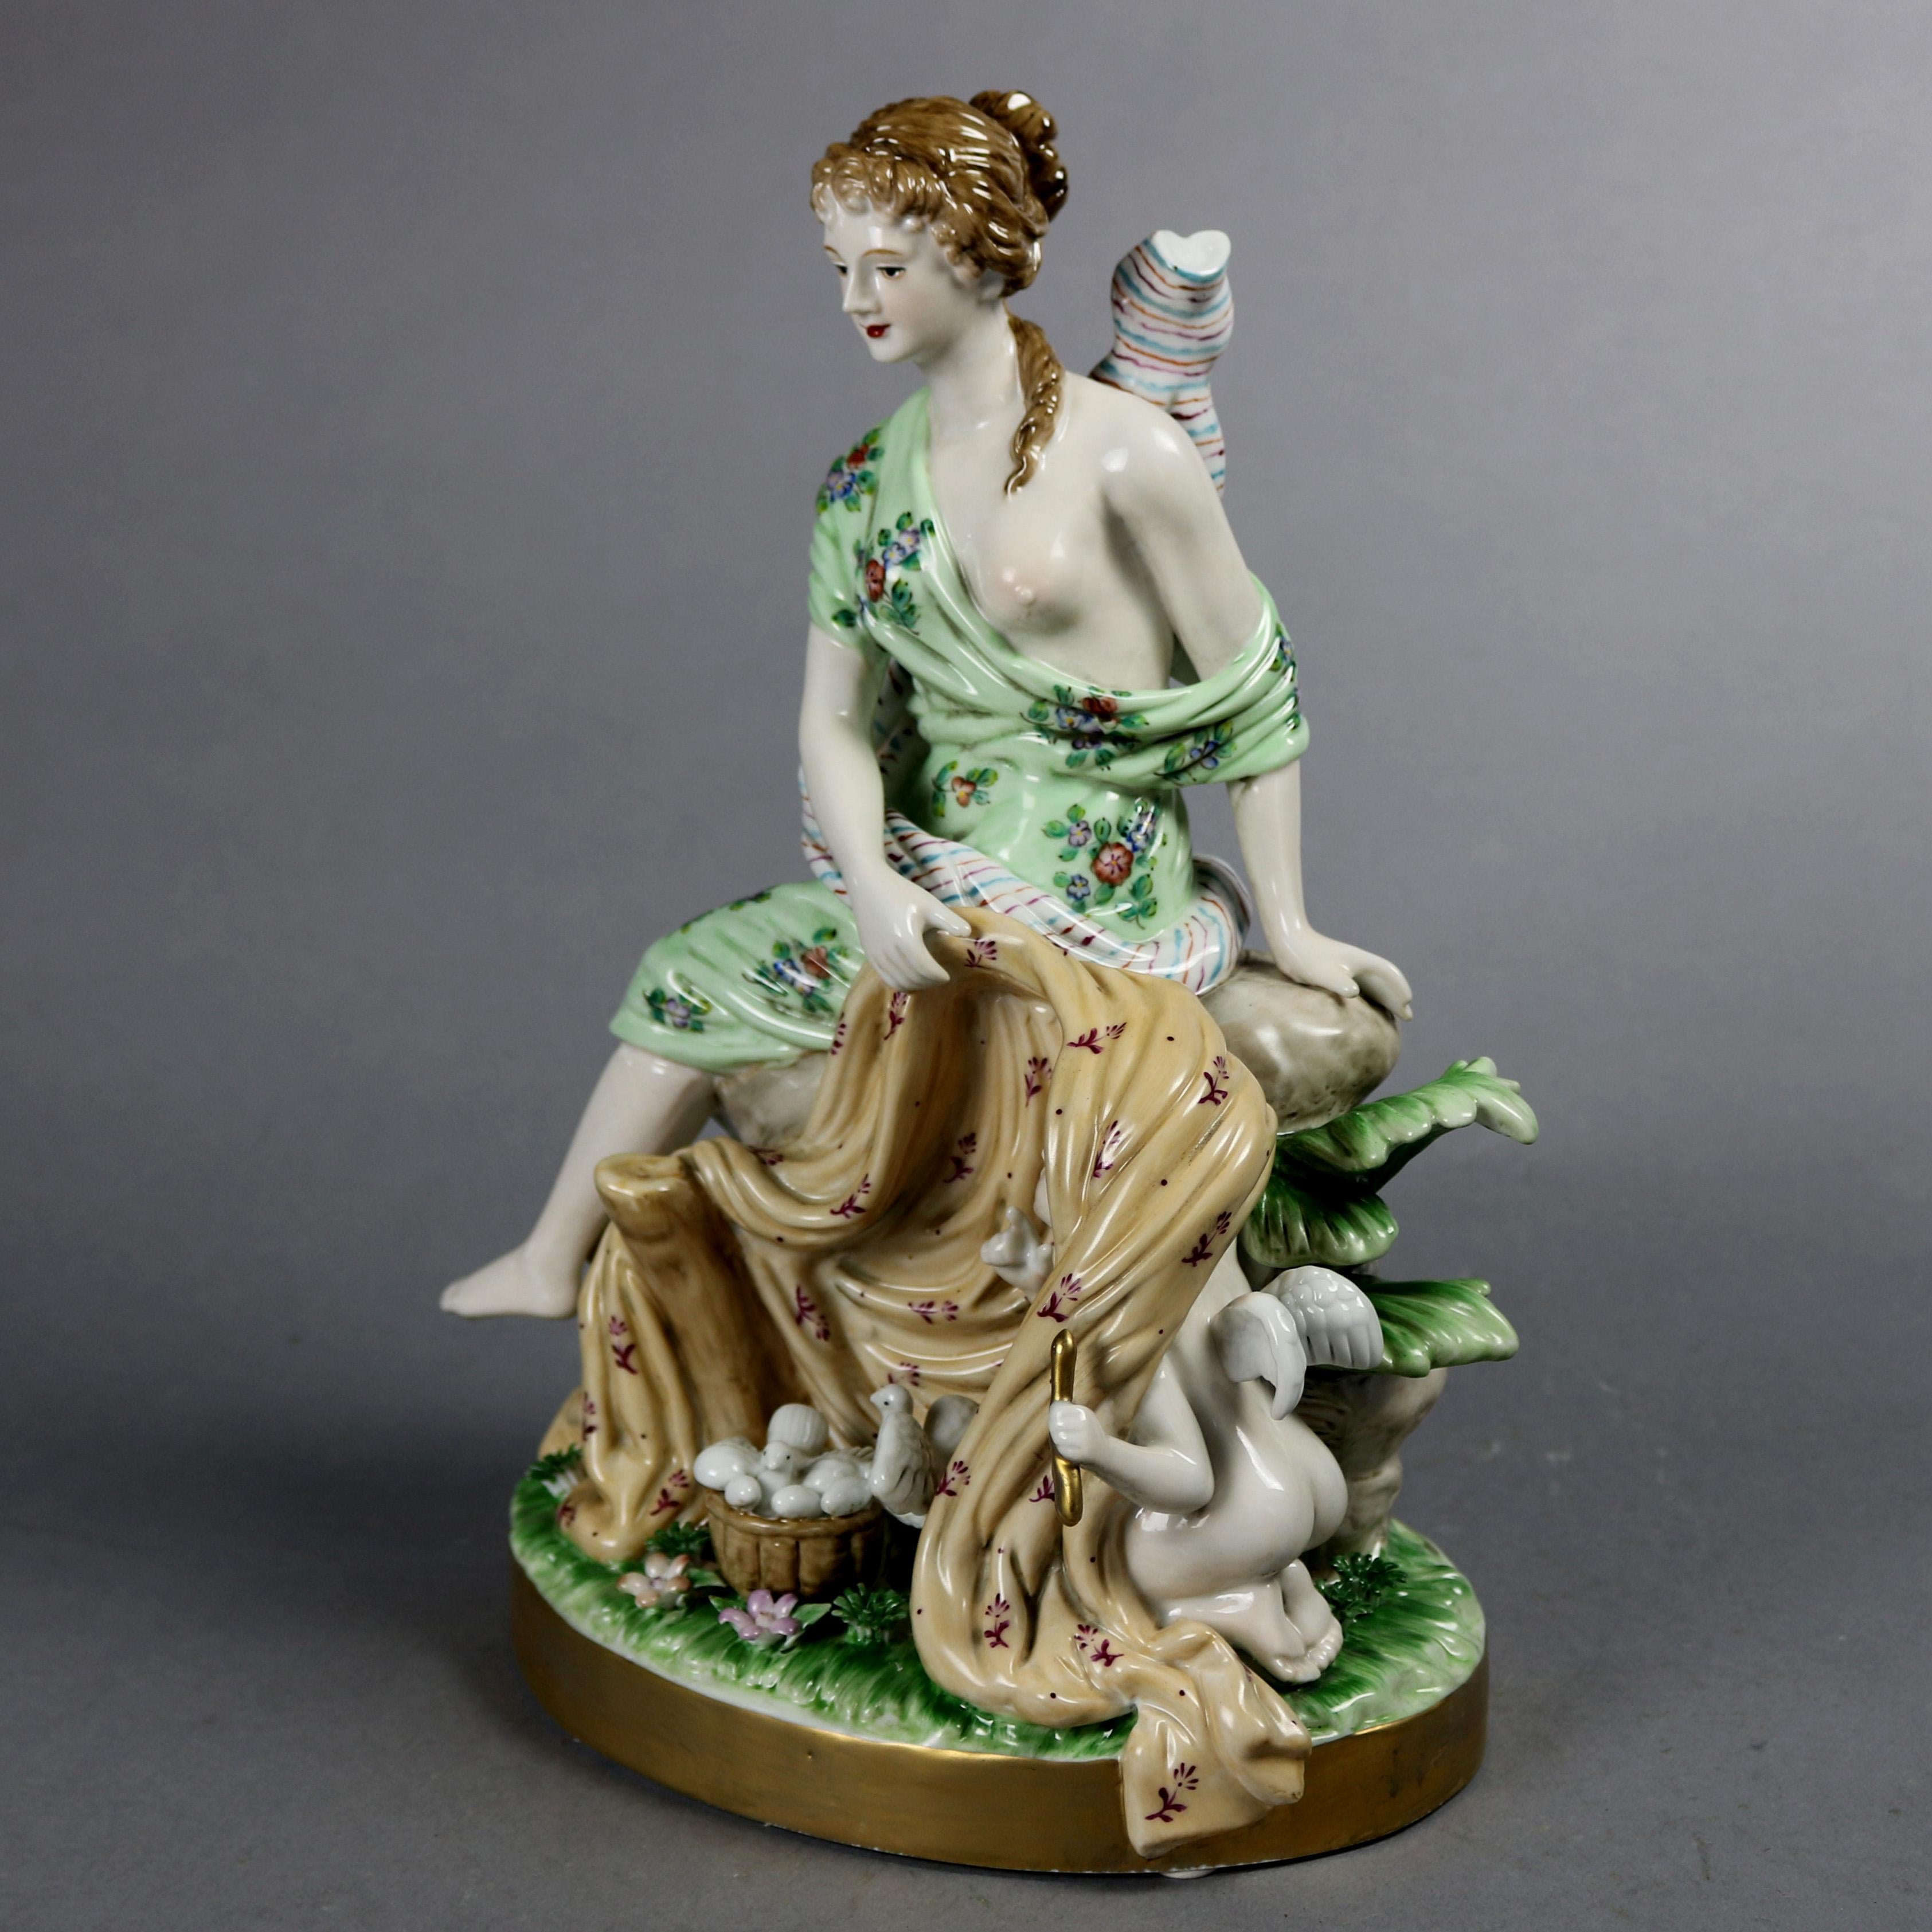 A German porcelain grouping offers hand painted and gilt partial nude Classical woman with playful cherub hiding beneath a blanket in countryside setting, RK Dresden Germany mark on base as photographed, 20th century

Measures: 12.75